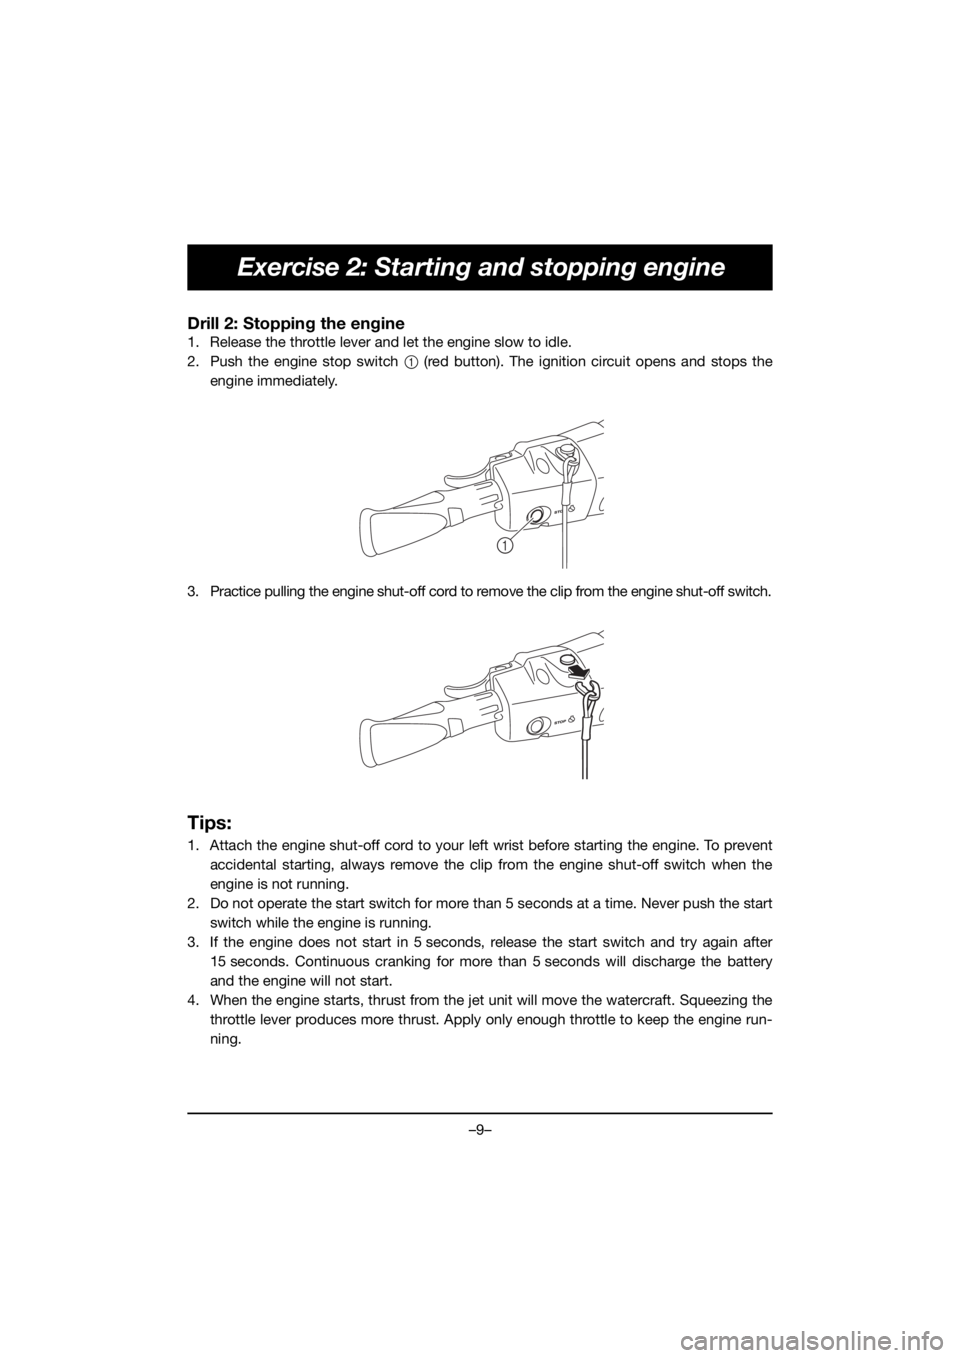 YAMAHA EXR 2020 User Guide –9–
Exercise 2: Starting and stopping engine
Drill 2: Stopping the engine
1. Release the throttle lever and let the engine slow to idle.
2. Push the engine stop switch 1 (red button). The ignition